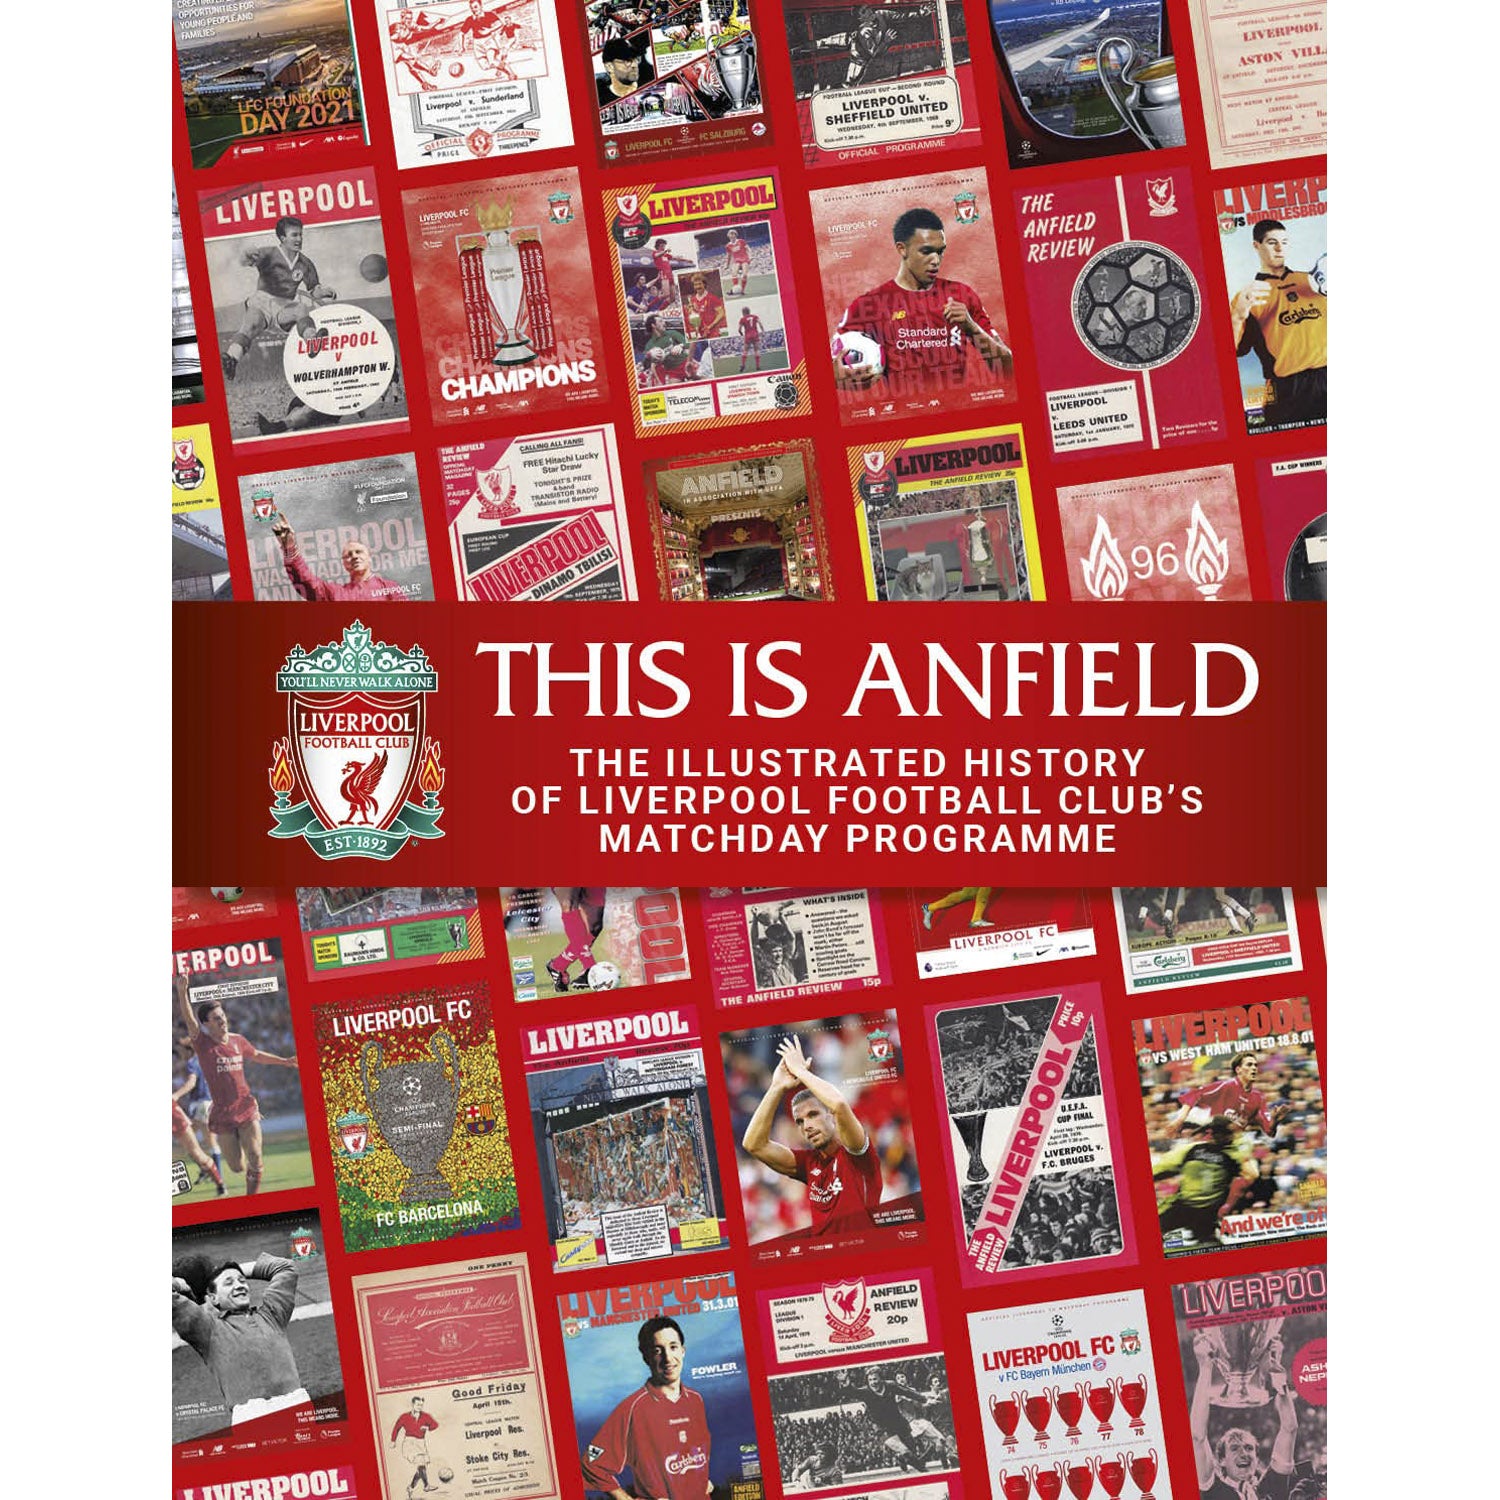 This Is Anfield – The Illustrated History of Liverpool Football Club's Matchday Programme